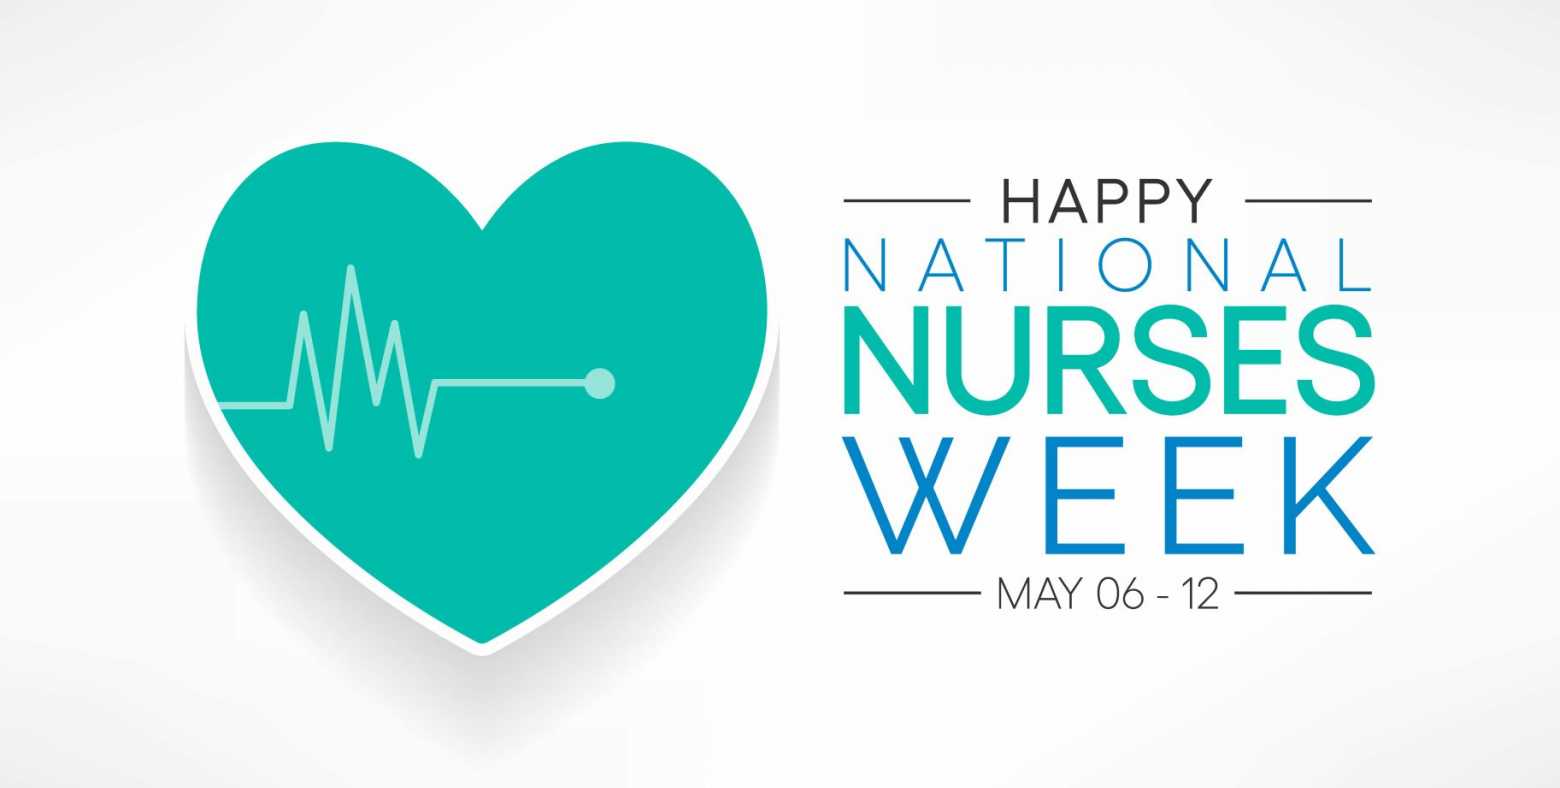 National Nurses Week with green heart and heartbeat 